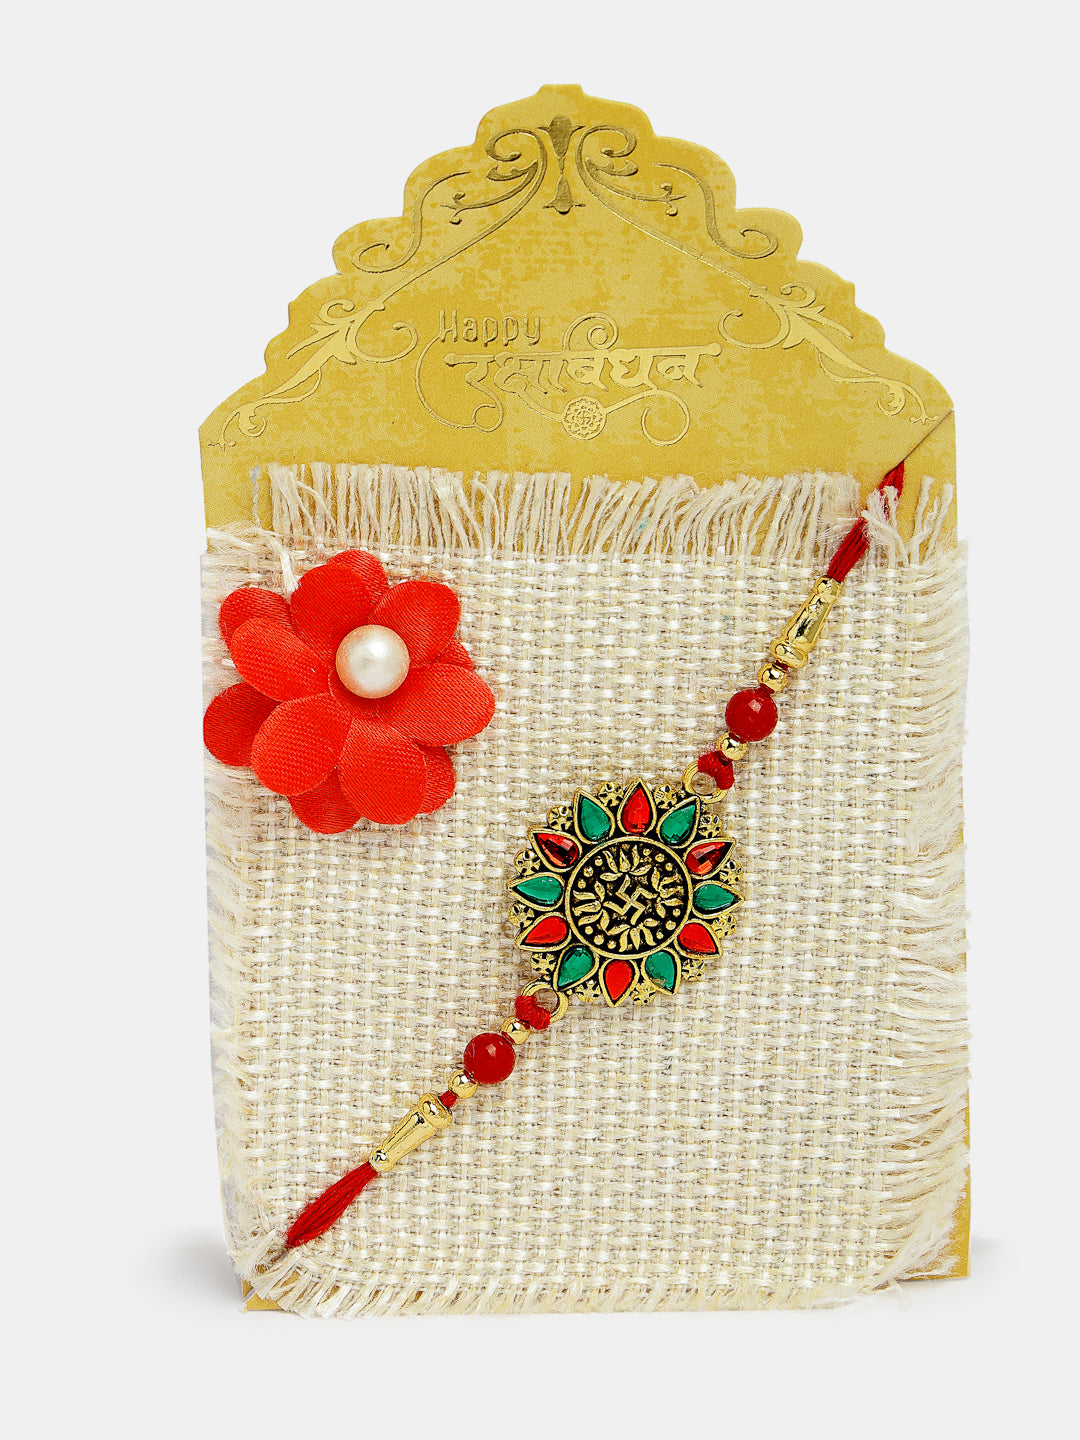 Red & Gold-Toned Stone-Studded Rakhi With Roli Chawal & Chocolate - Nvr